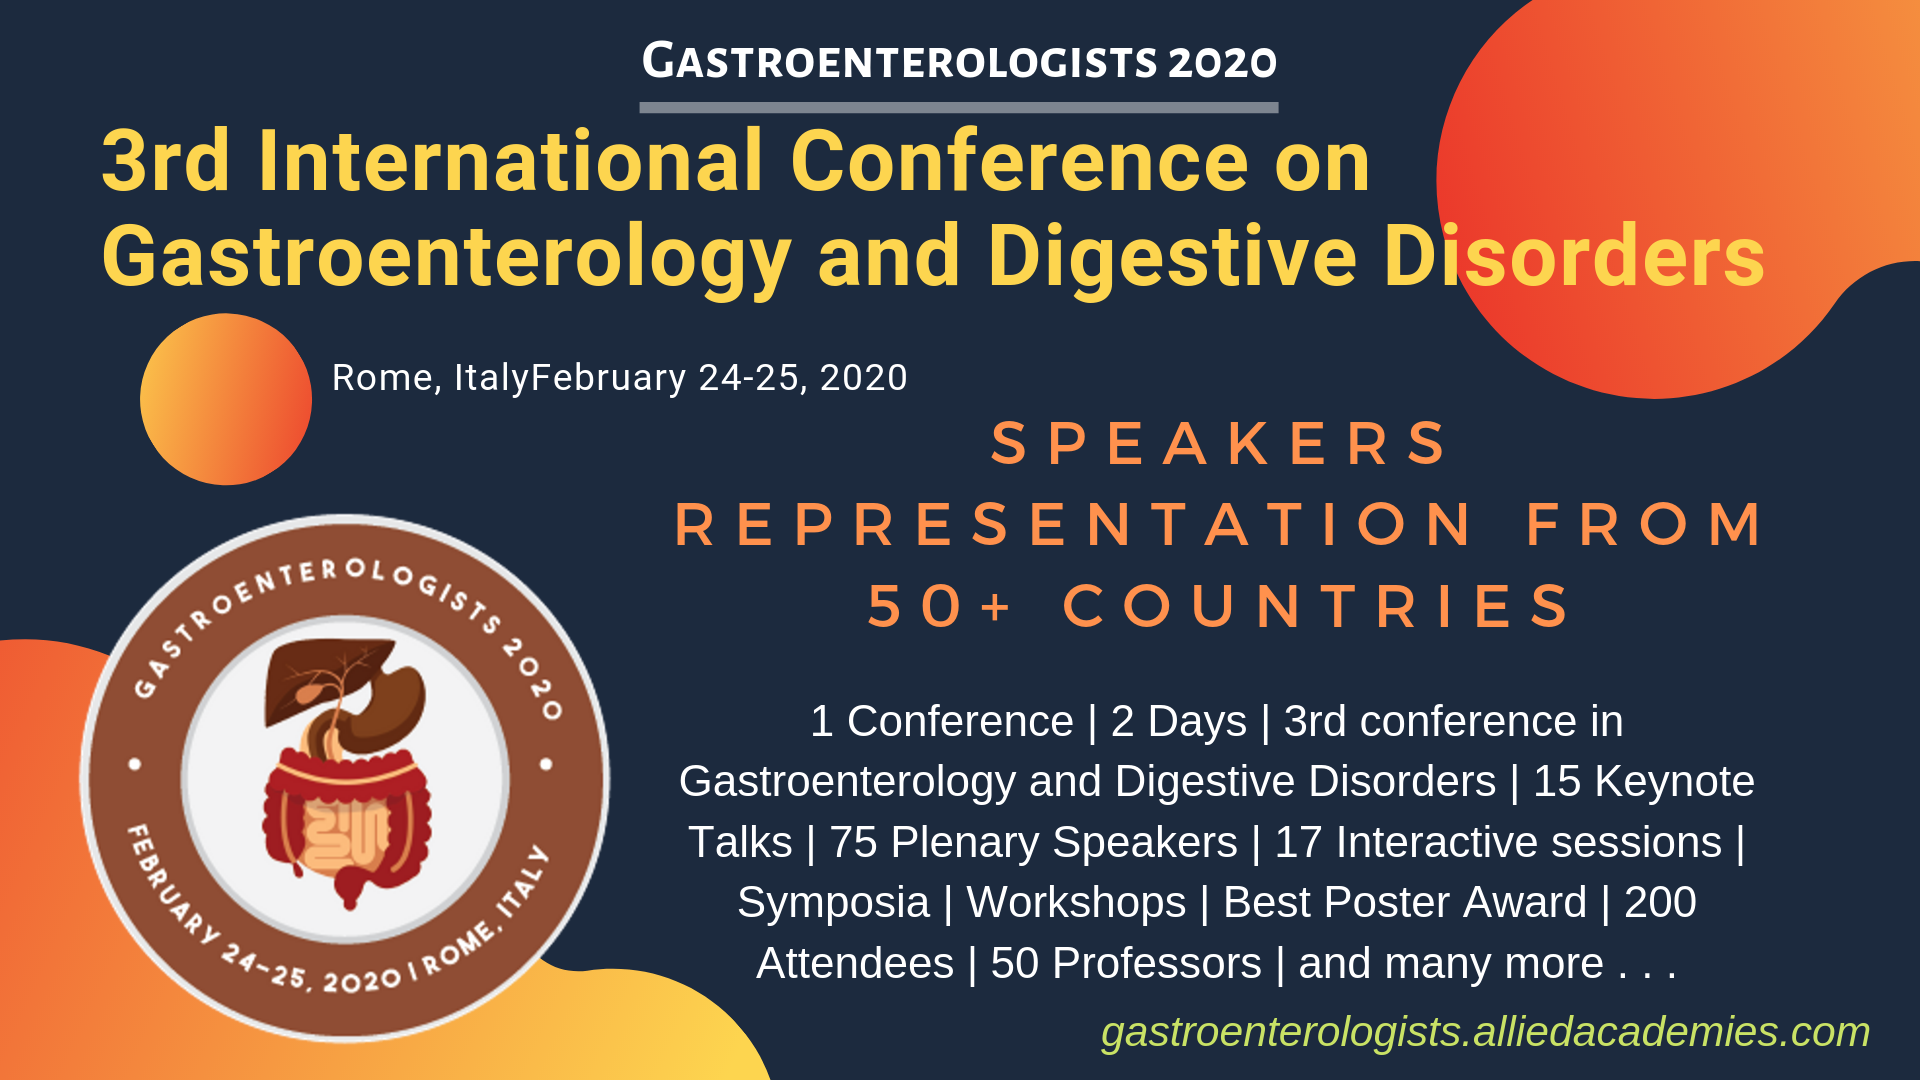 3rd International Conference on Gastroenterology and Digestive Disorders, Rome, Lazio, Italy